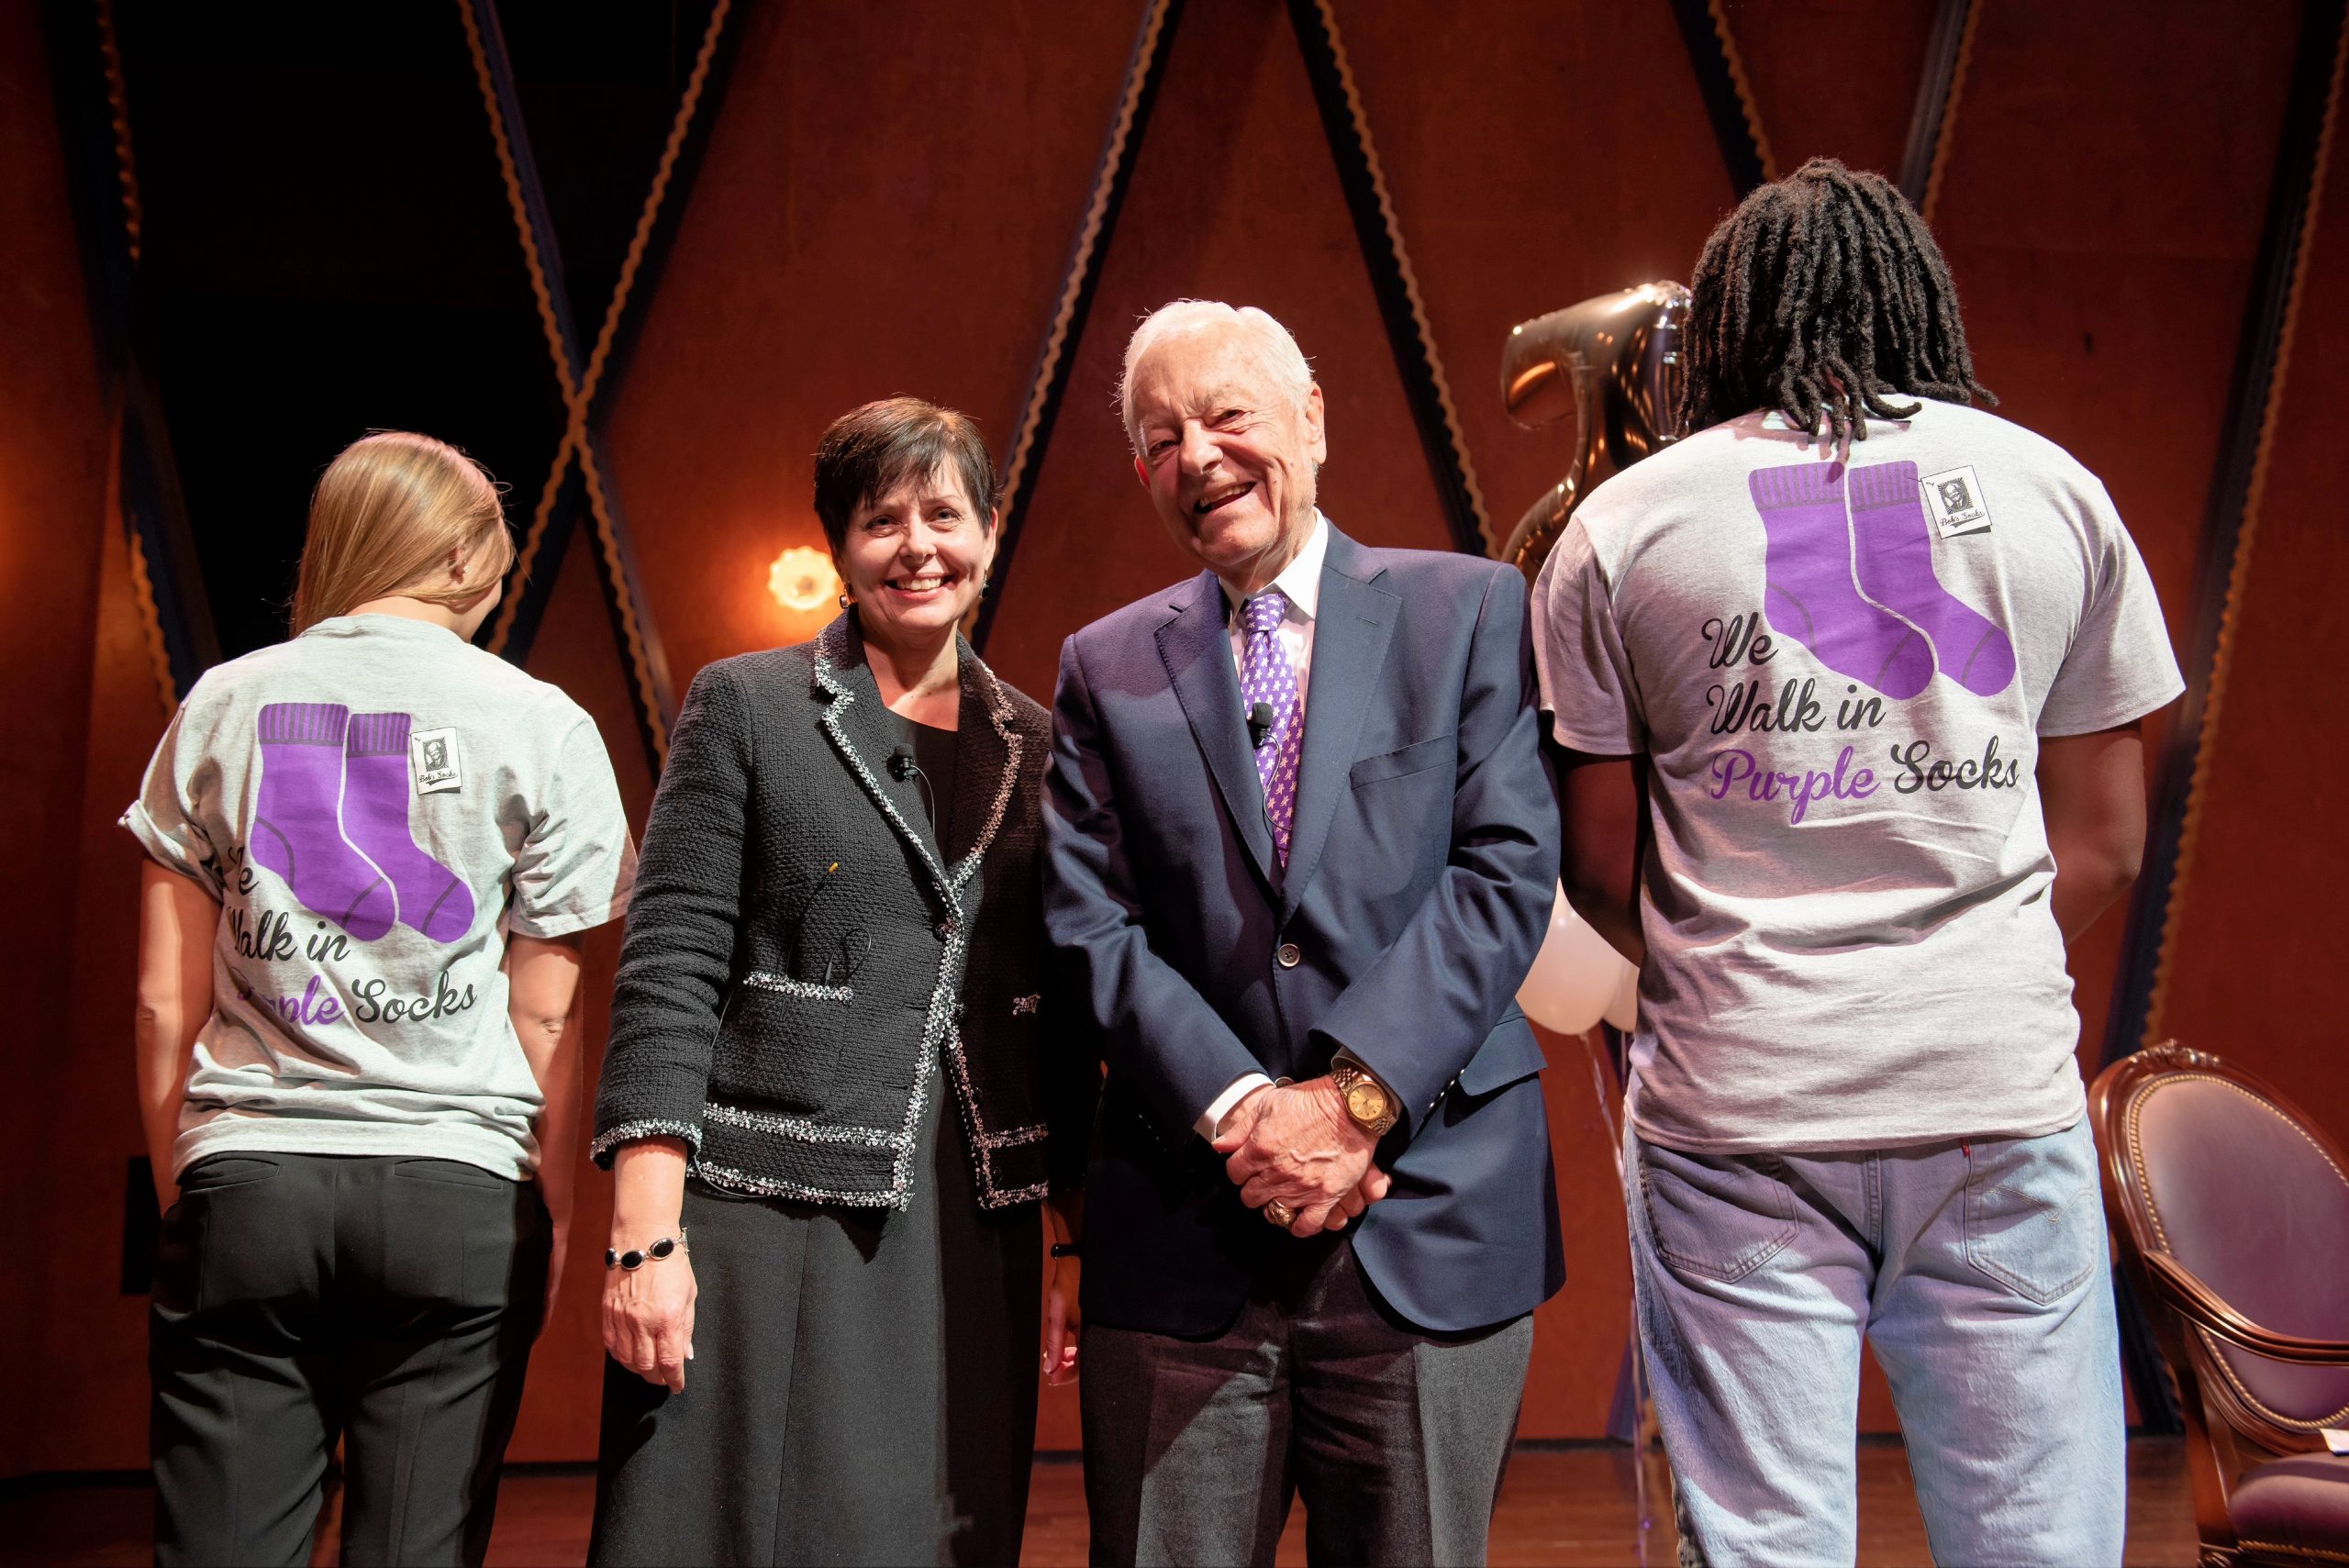 Dean Kristie Bunton and Bob Schieffer stand on stage at the PepsiCo Recital Hall in between Schieffer College students Abbey Widick and Brandon Kitchin as they model the 